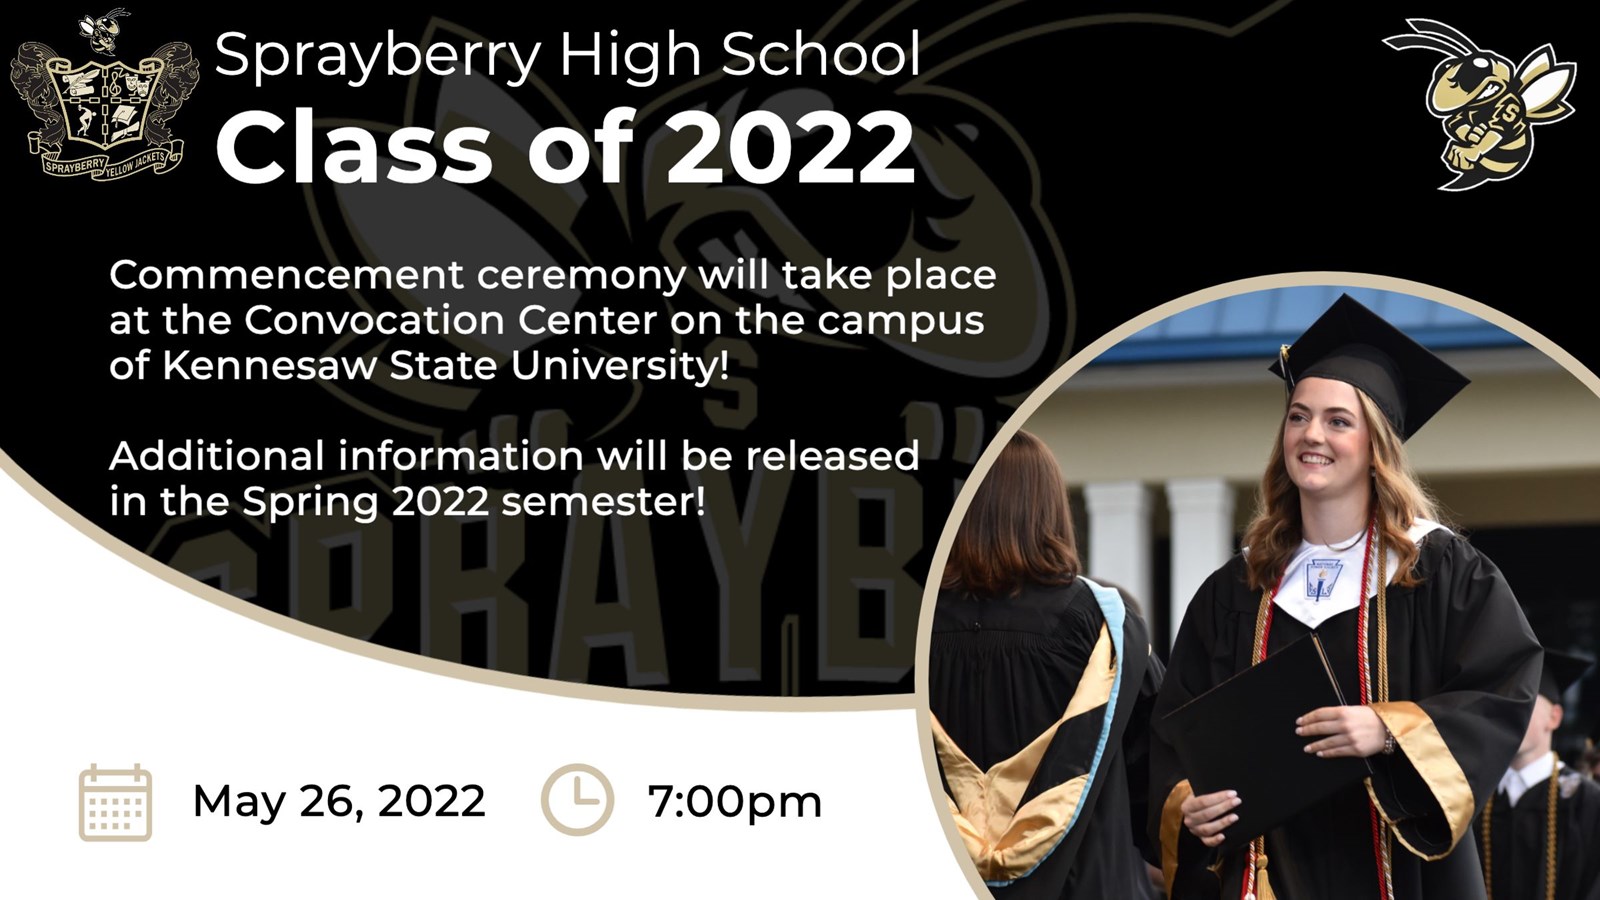 Class of 2022 Commencement Ceremony - Sprayberry High School